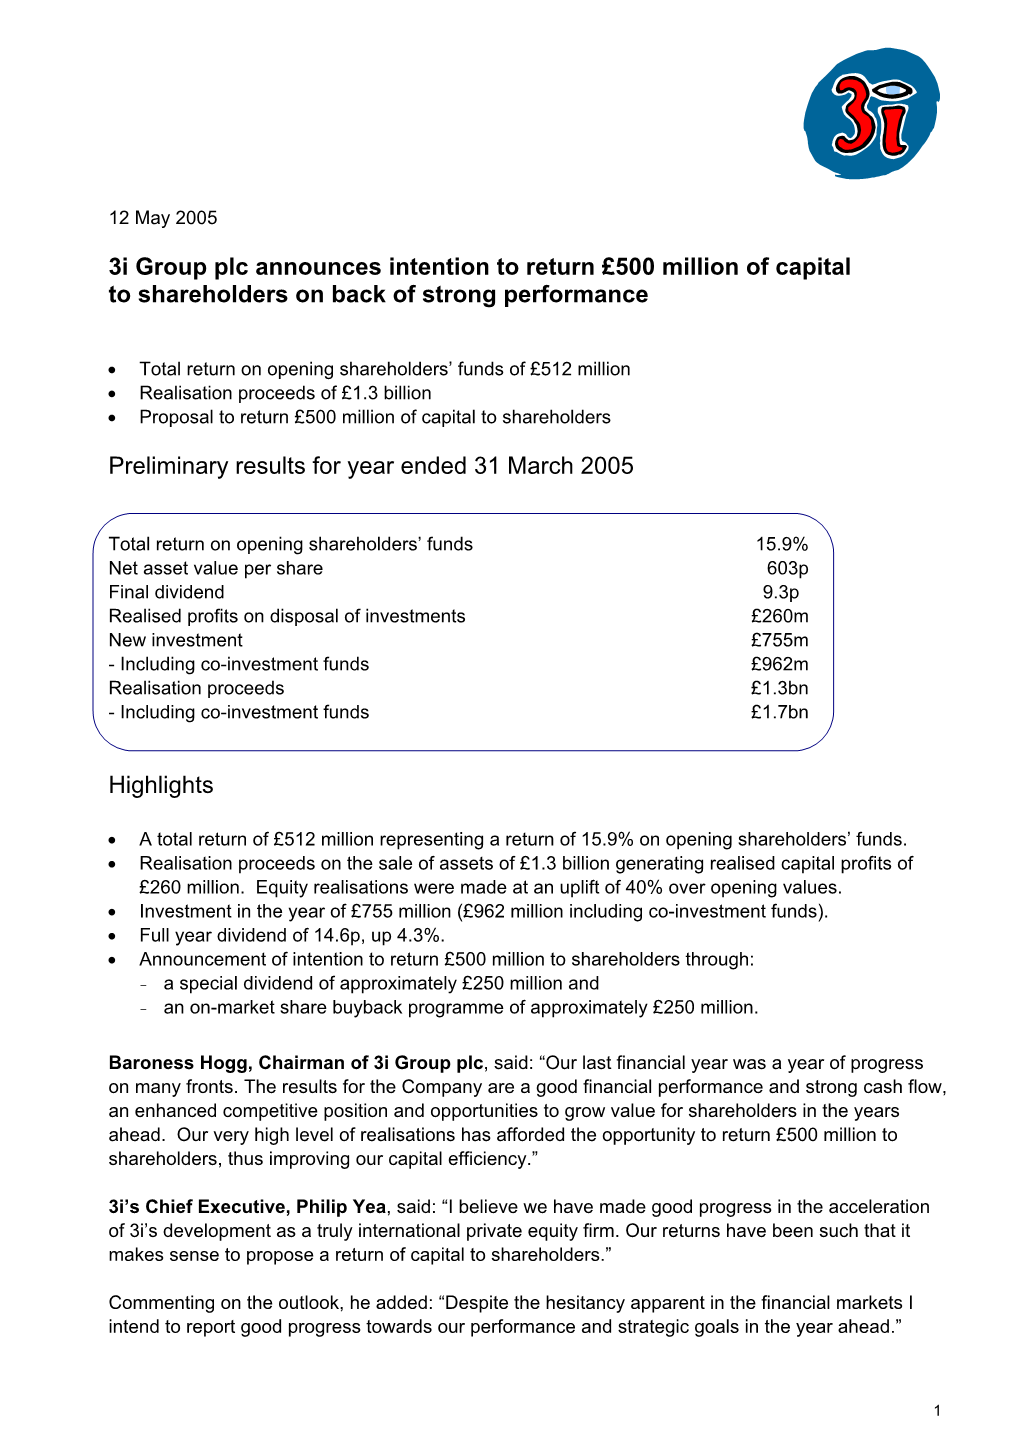 3I Group Plc Announces Intention to Return £500 Million of Capital to Shareholders on Back of Strong Performance